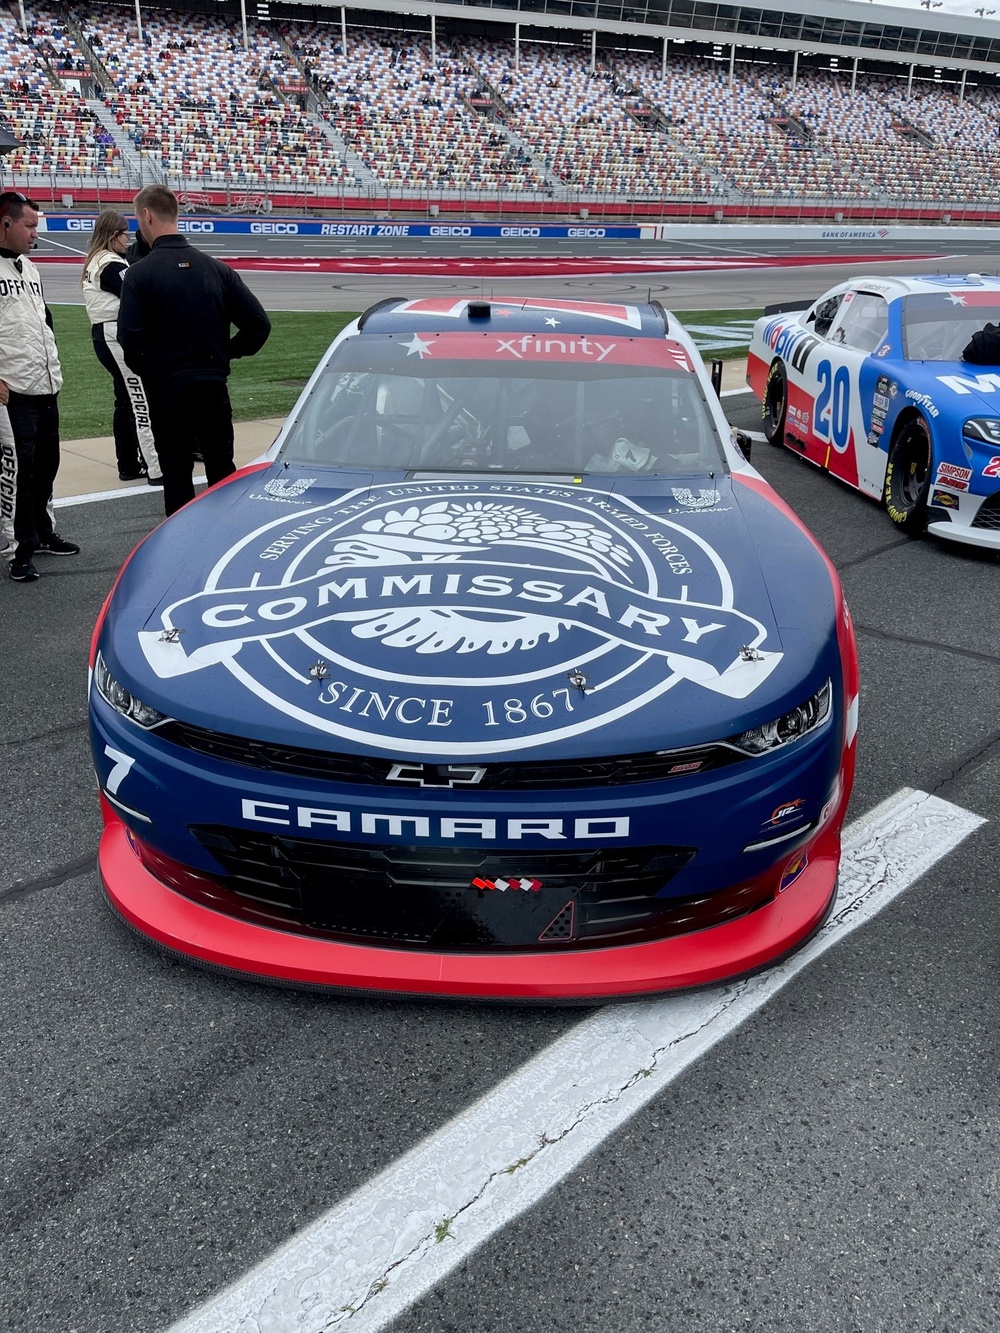 Commissary logo on hood of JR Motorsports car showcases benefit as Allgaier wins at Charlotte on Memorial Day